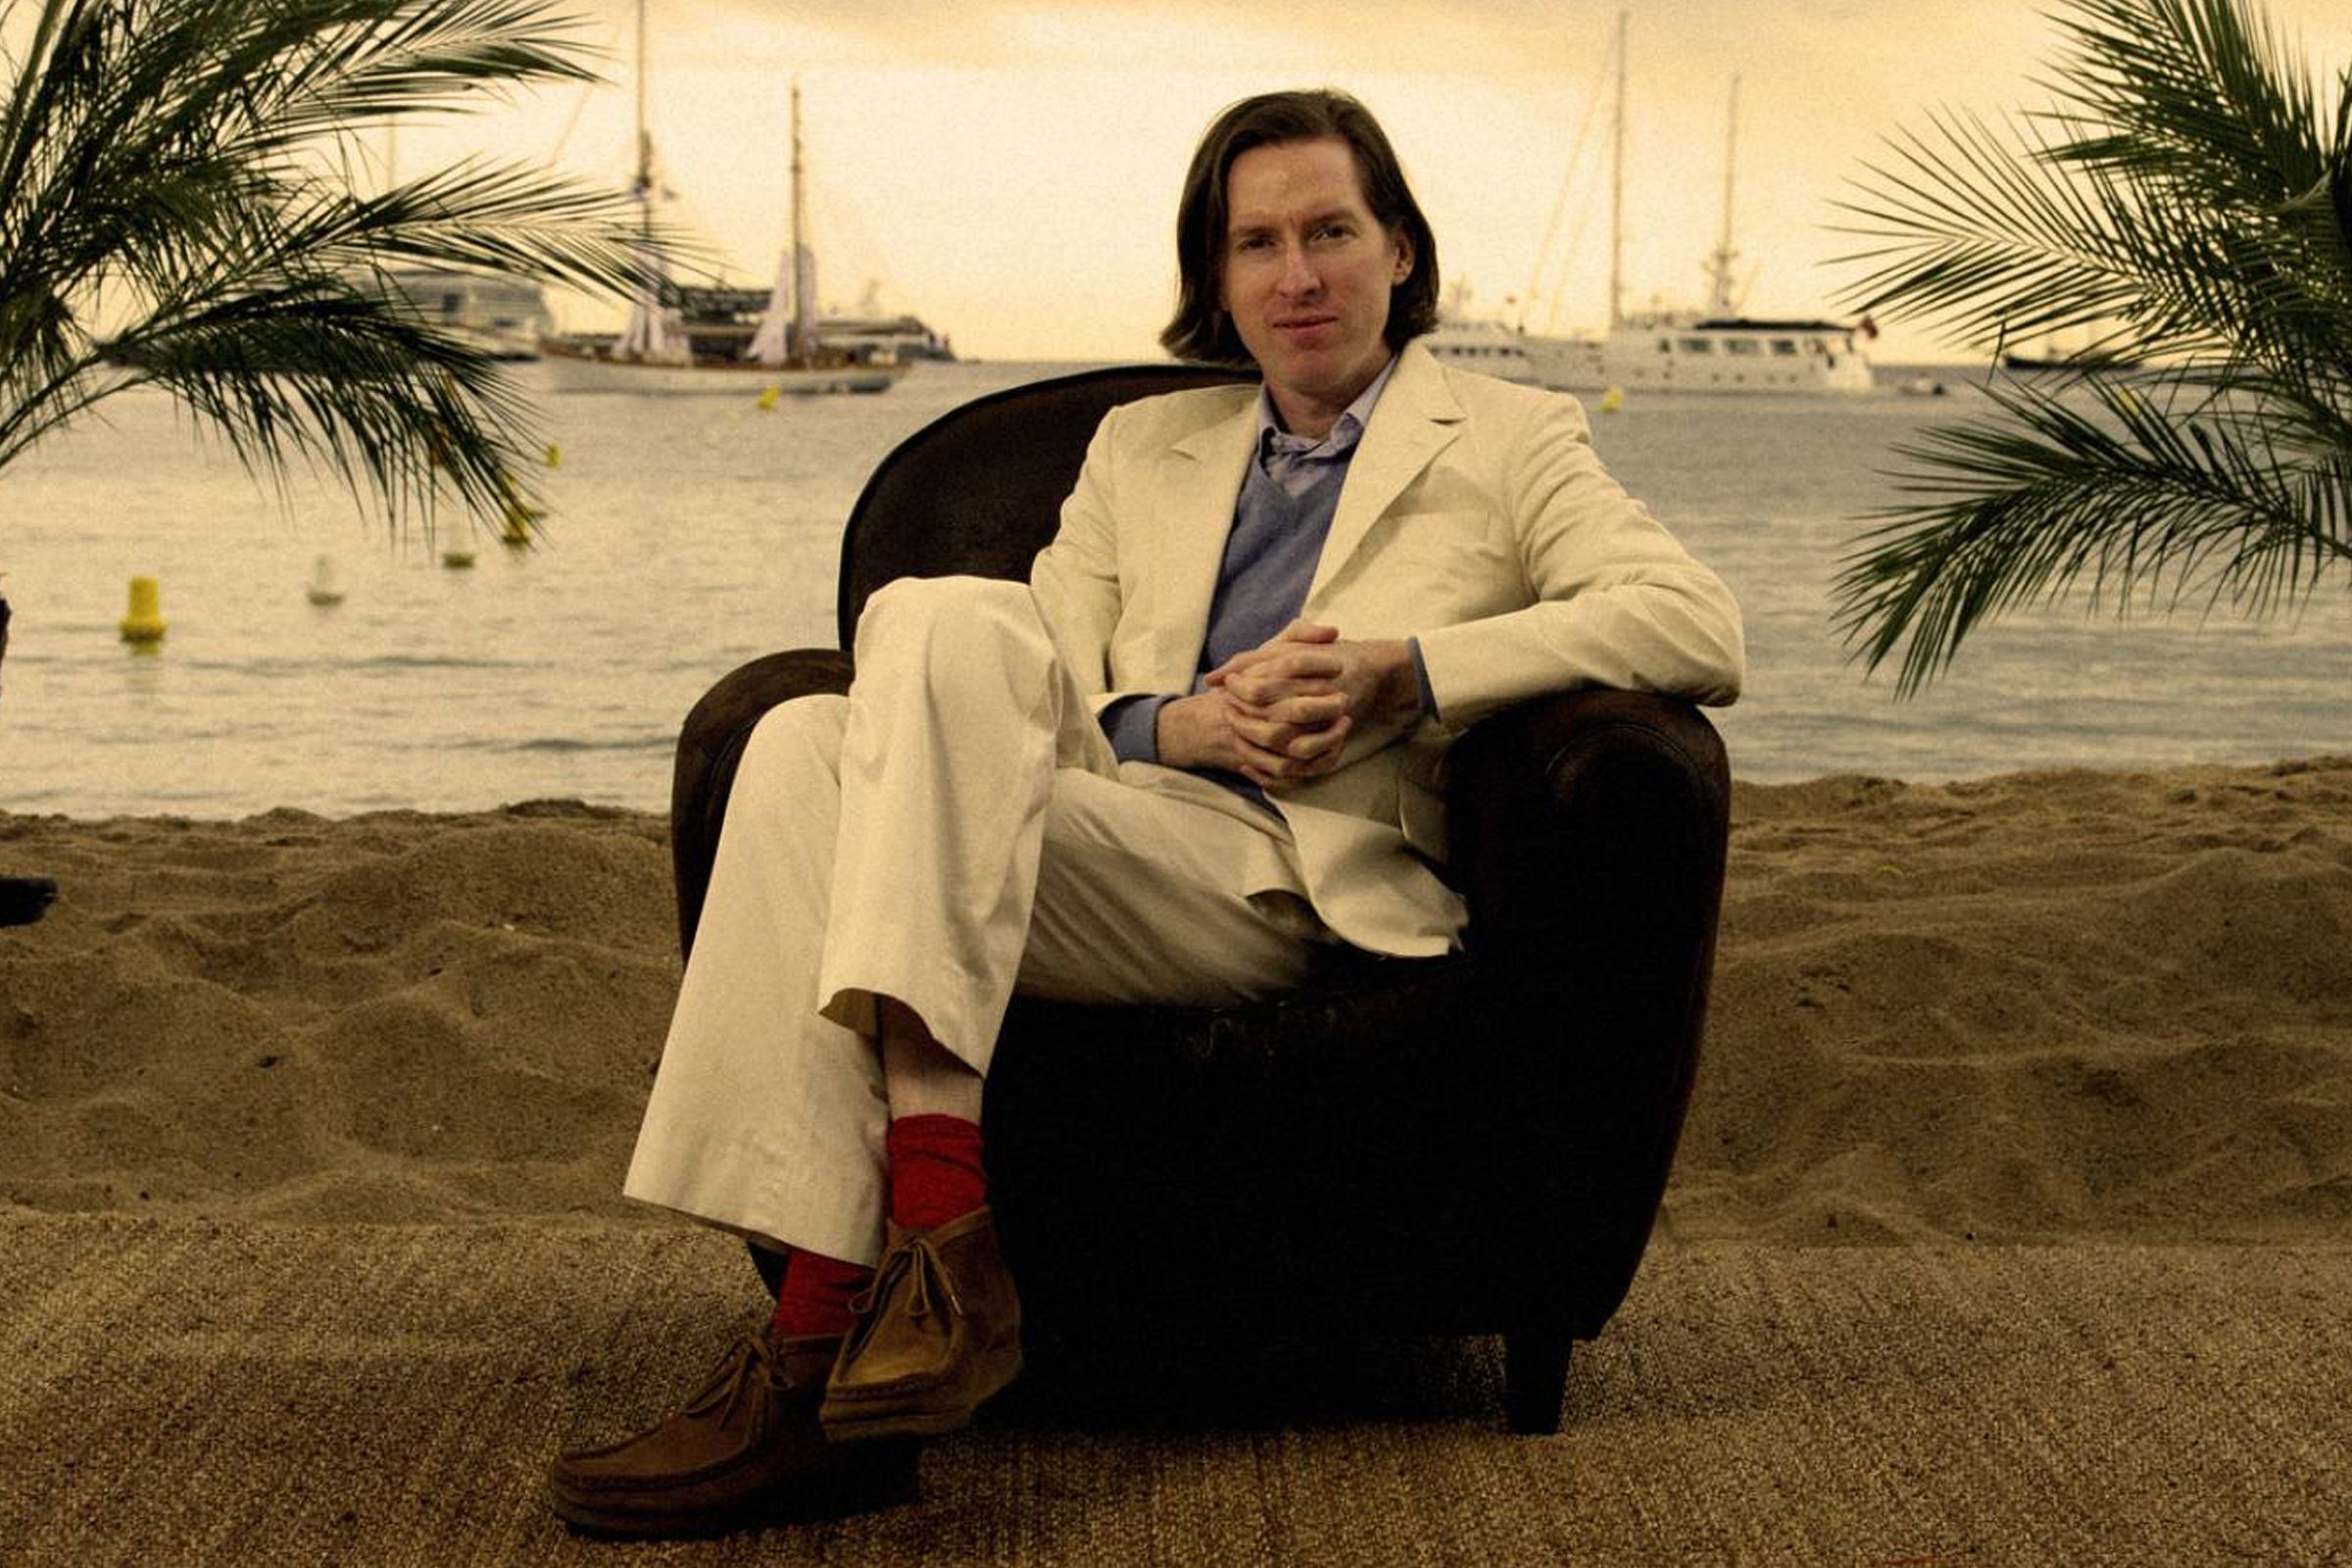 Everyone is recreating Wes Anderson's world. Wes Anderson isn't